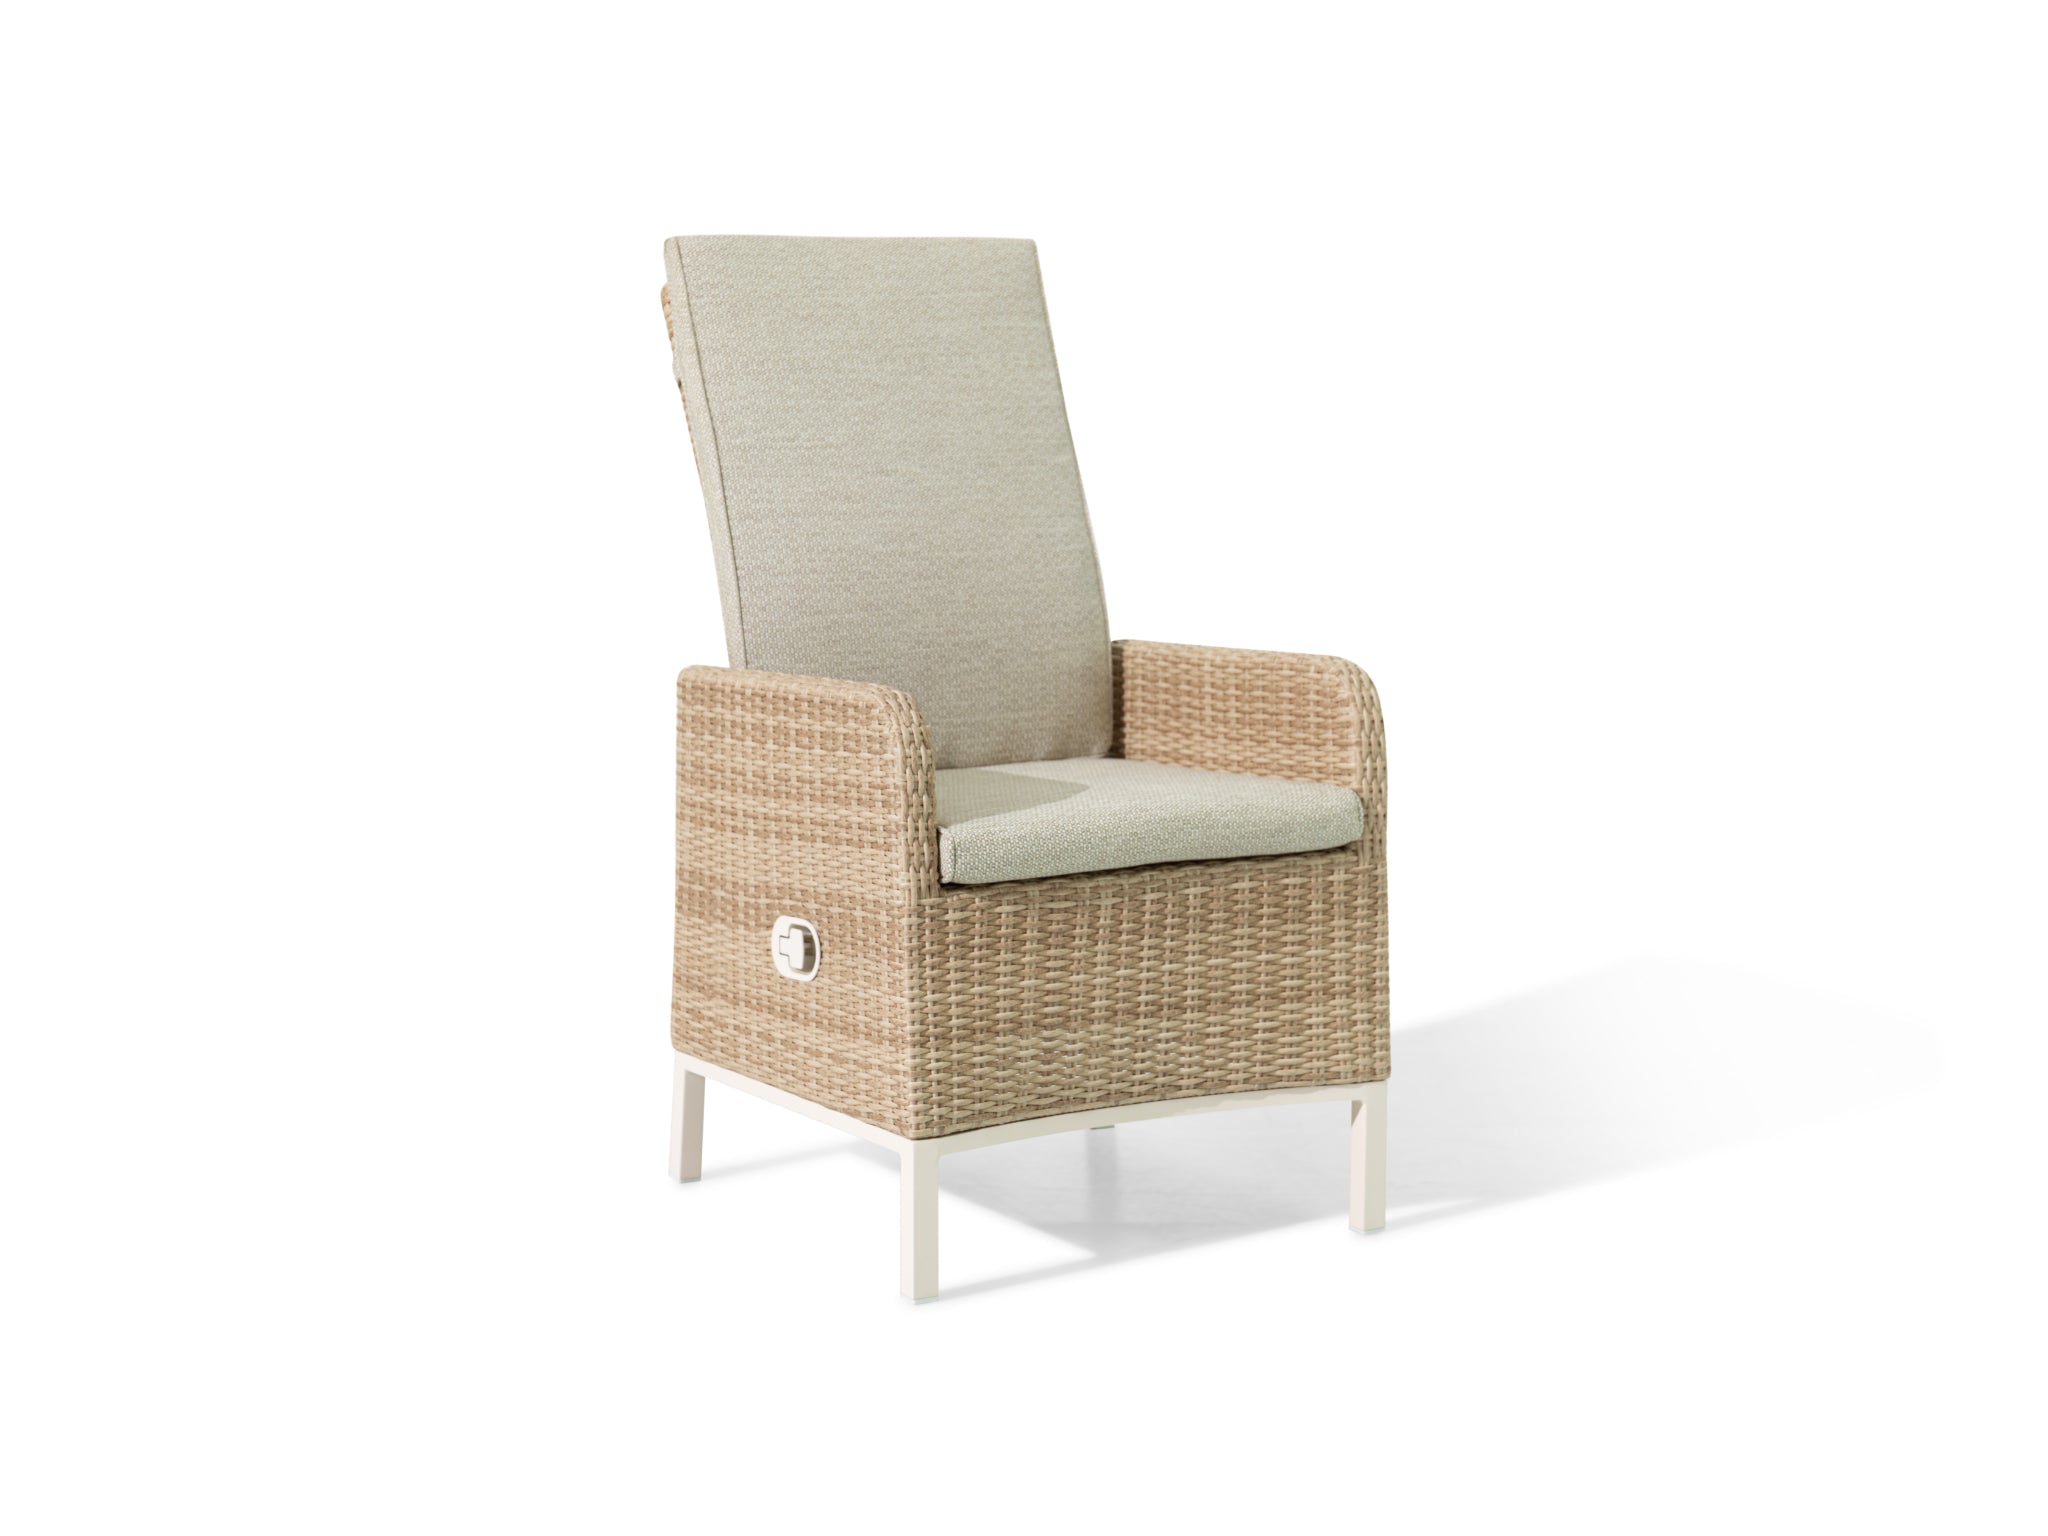 SIMPO by Sunlongarden Lilly Recliner